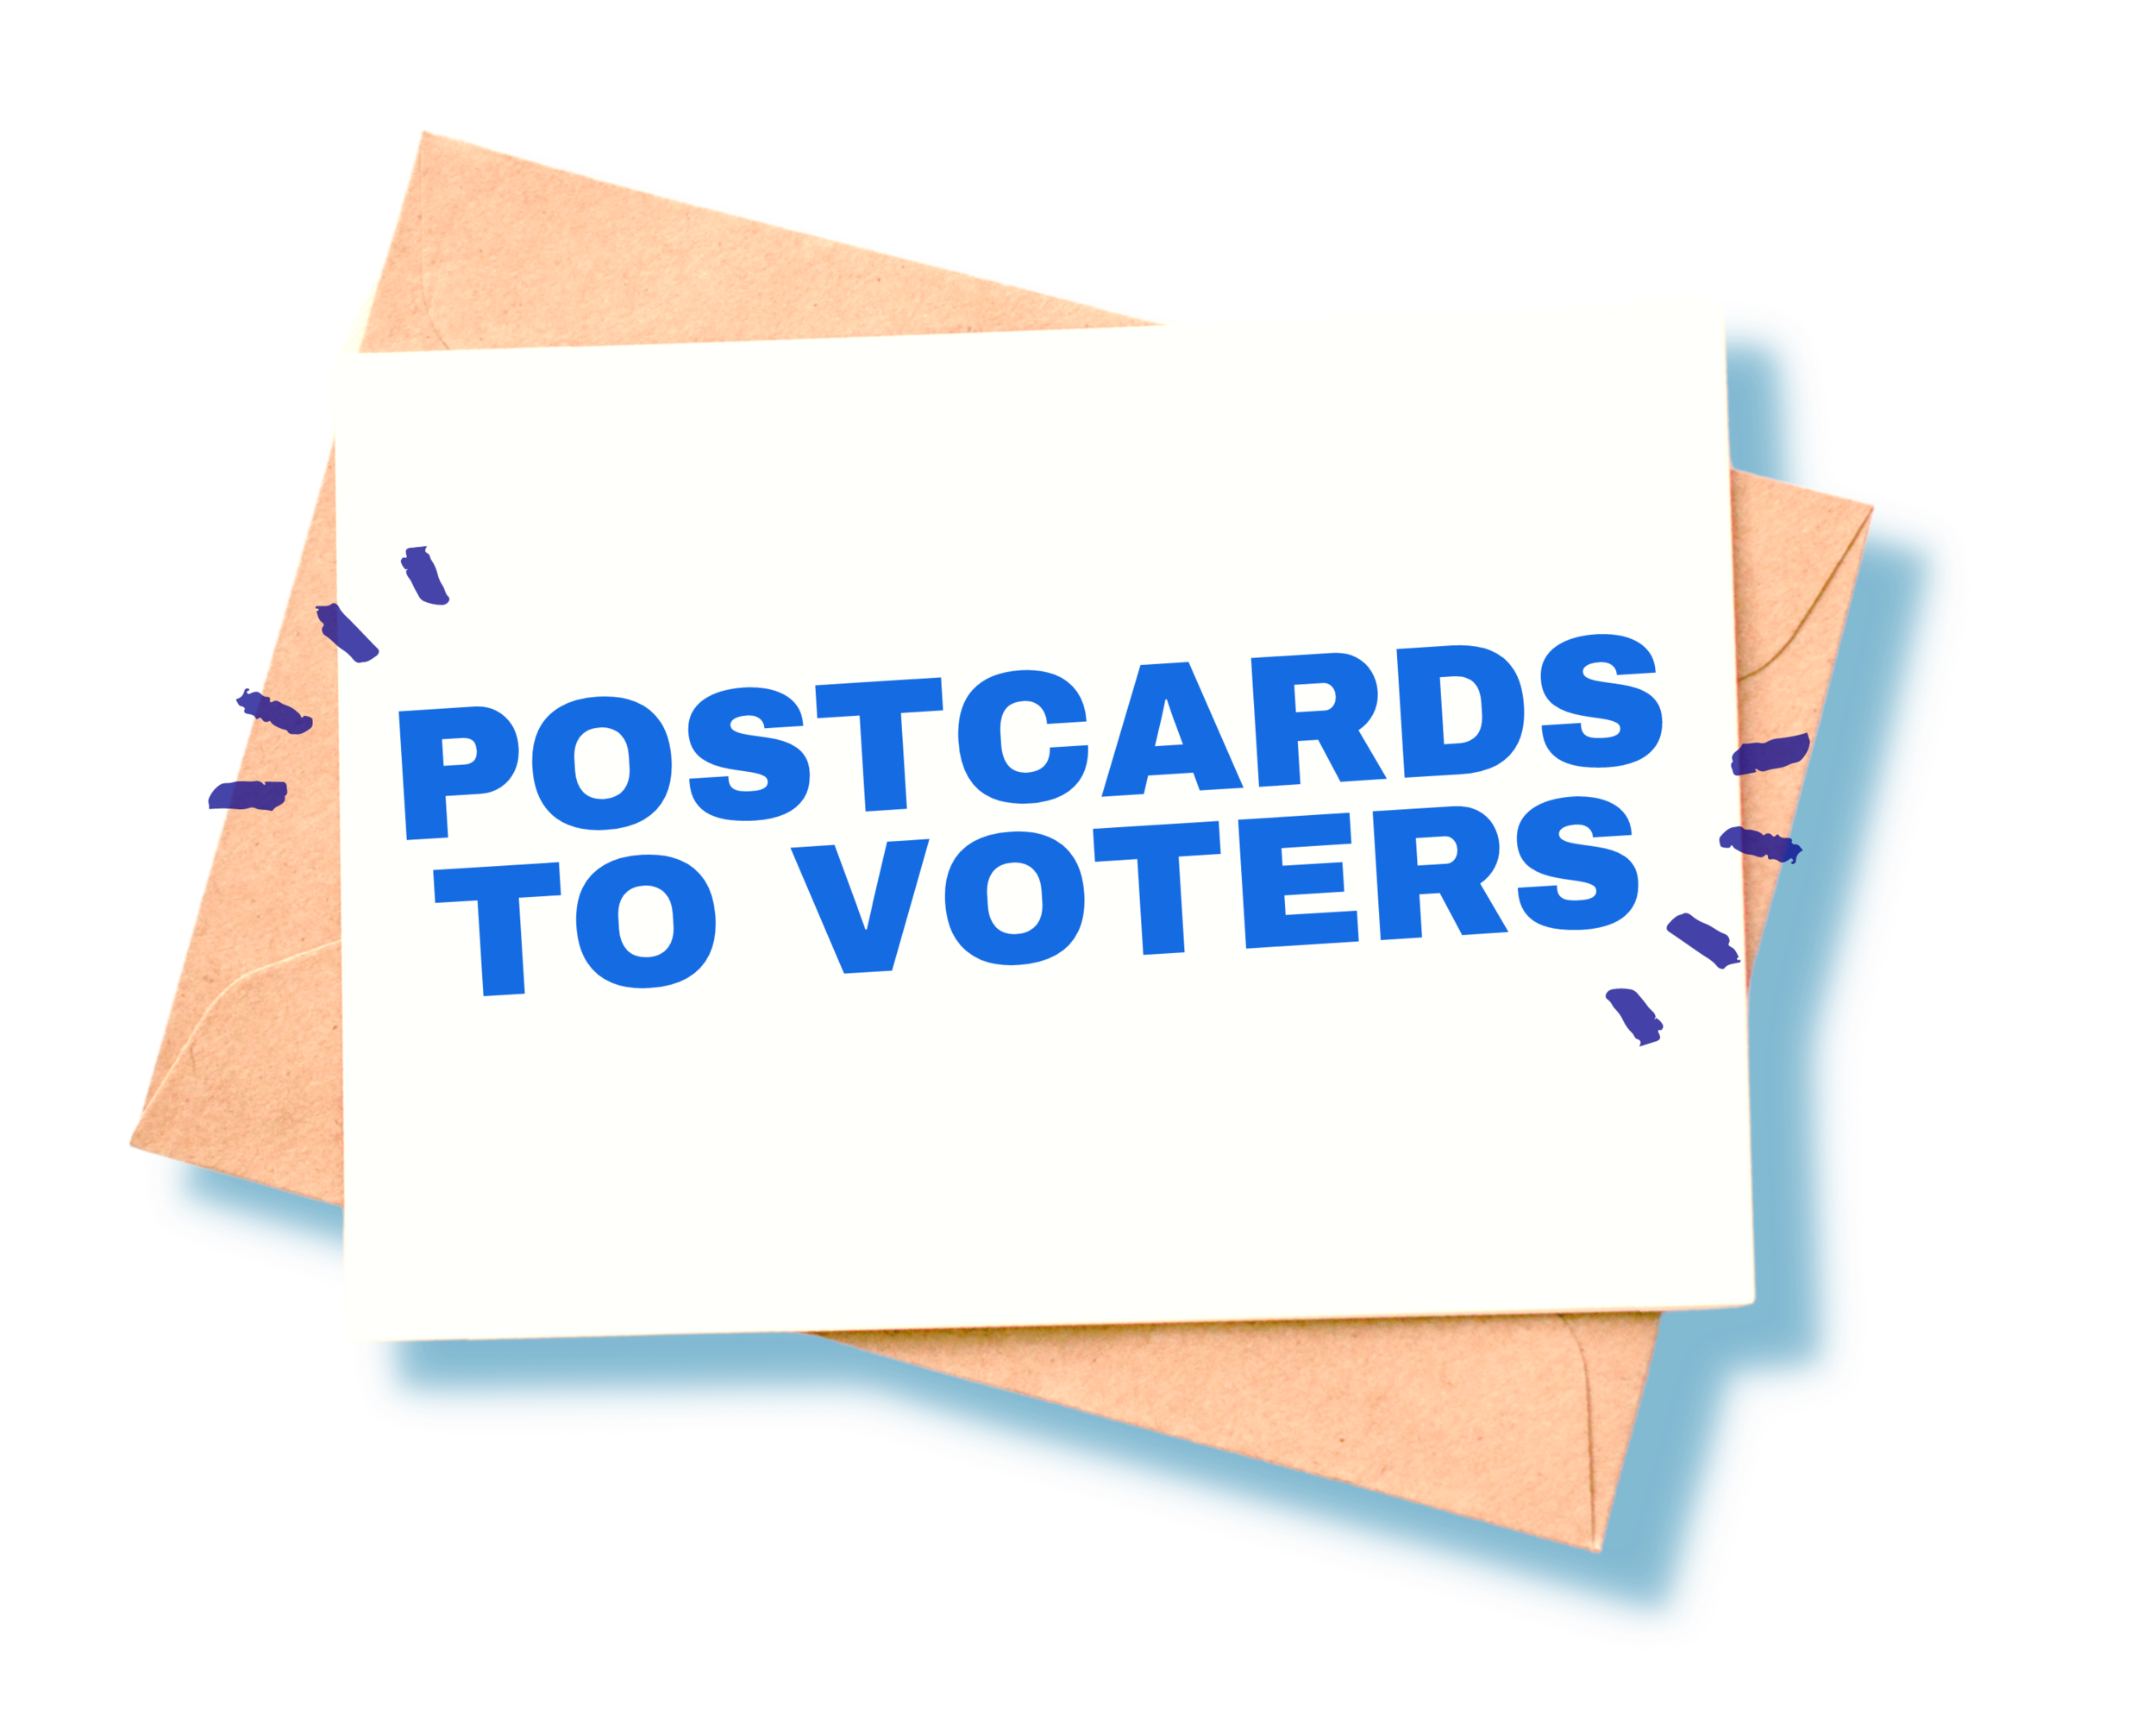 Postcards for Ohio: Voting By Mail